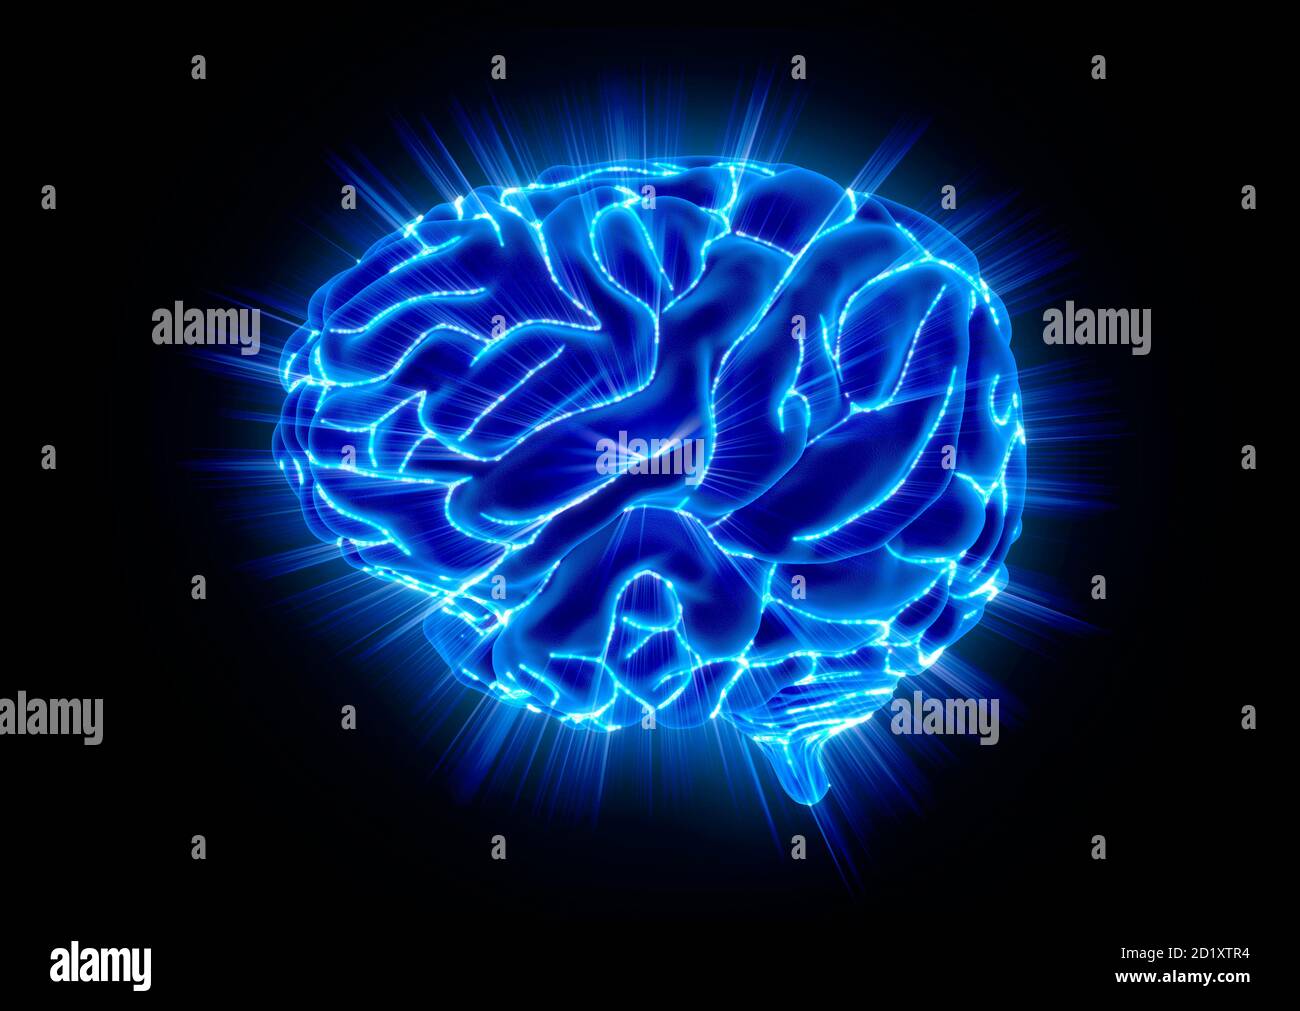 Glowing Human Brain isolated on Black Background. 3D illustration Stock Photo